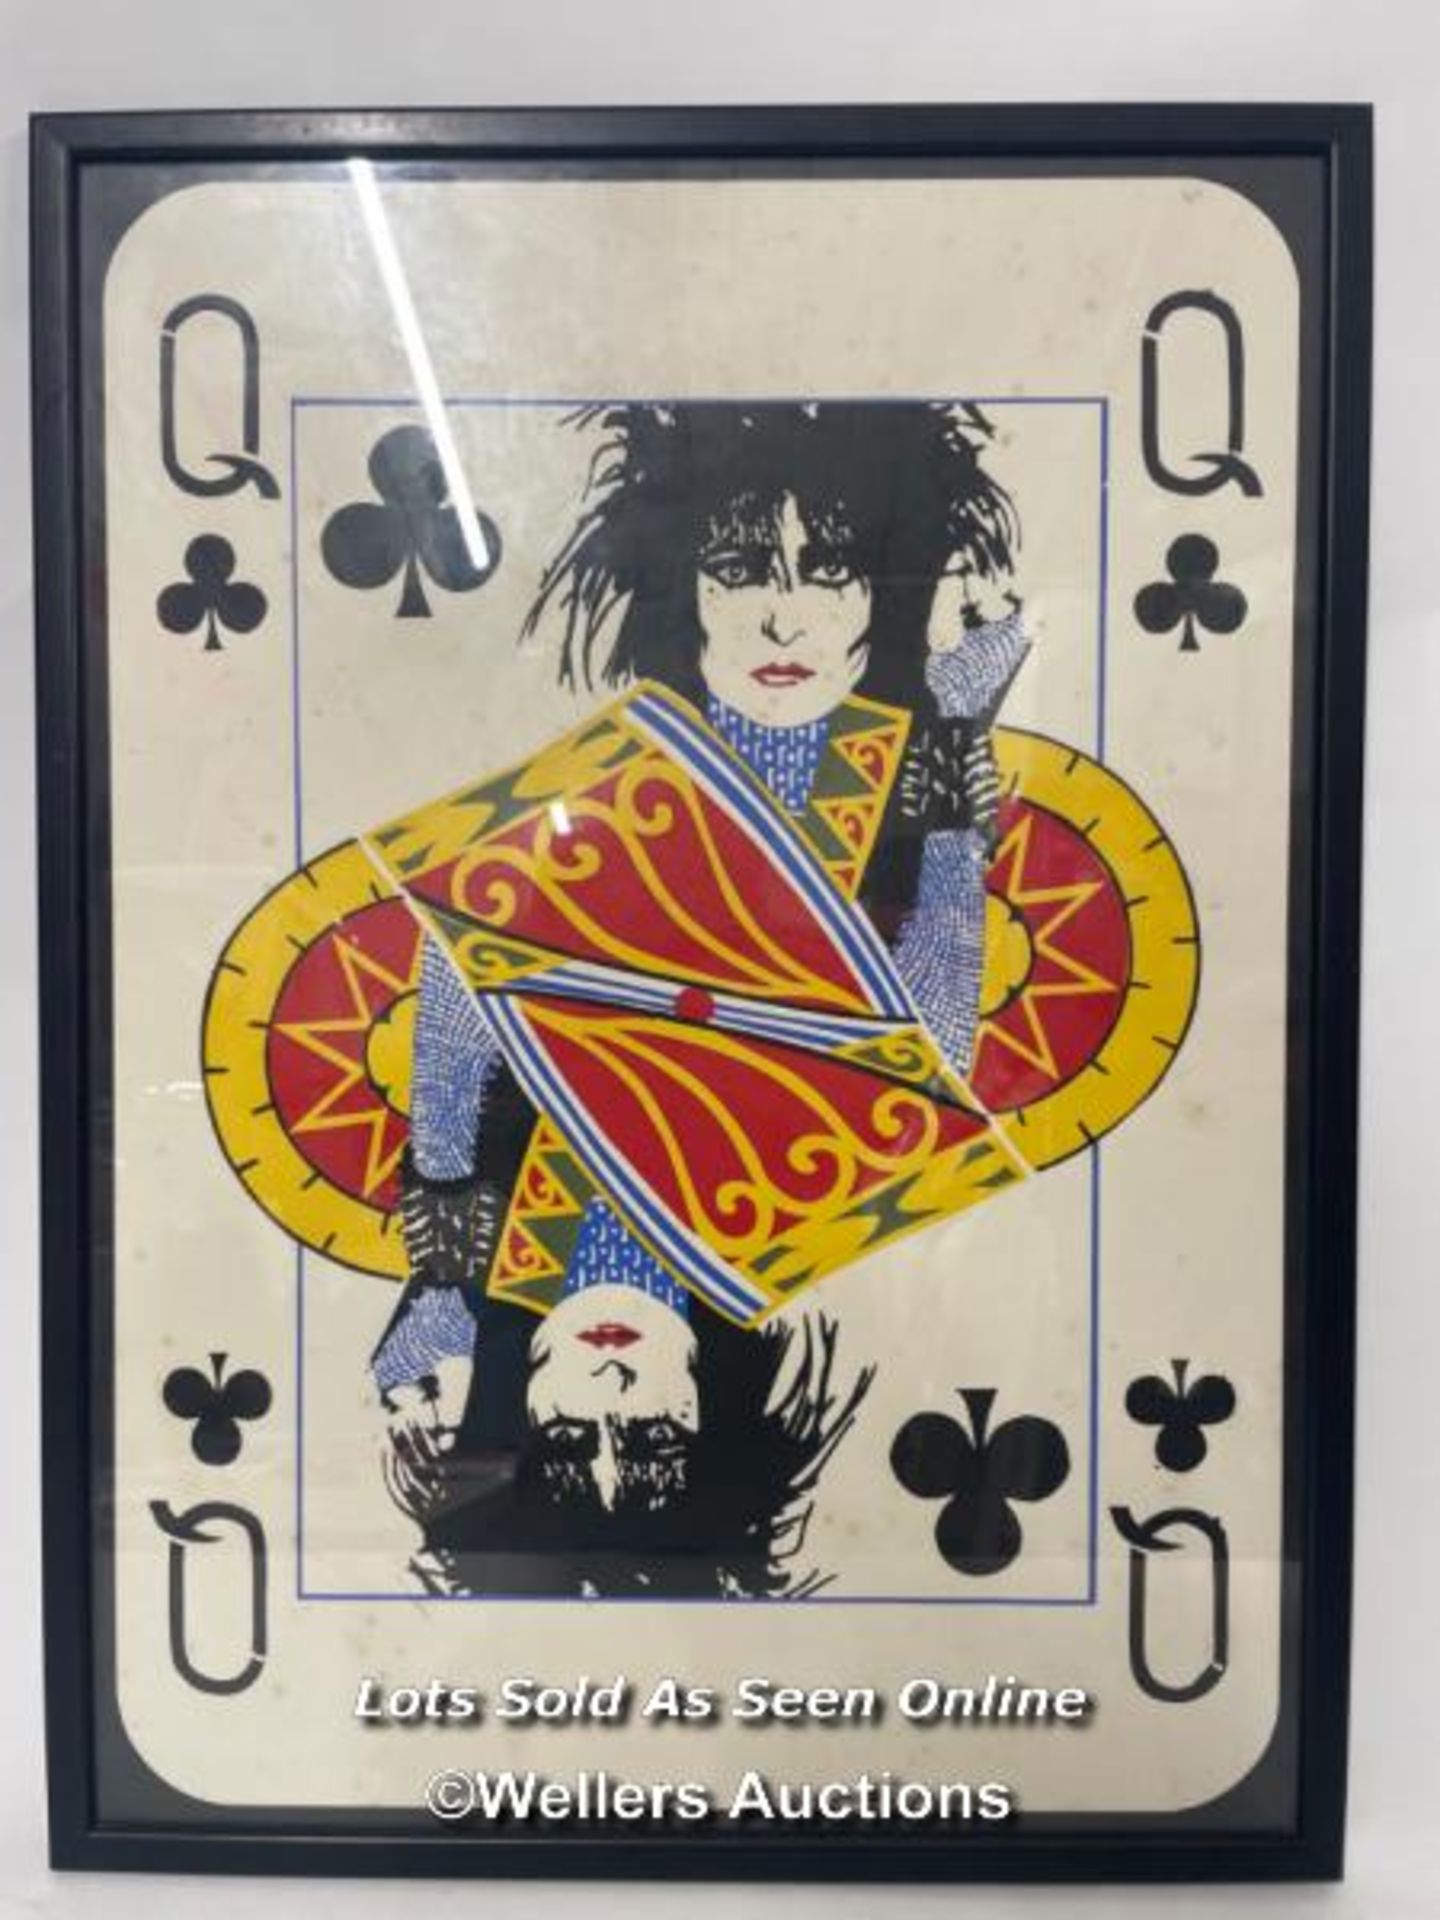 Siouxsie and the Banshees -Siouxsie Sioux original screen print "Queen of Clubs" framed & glazed